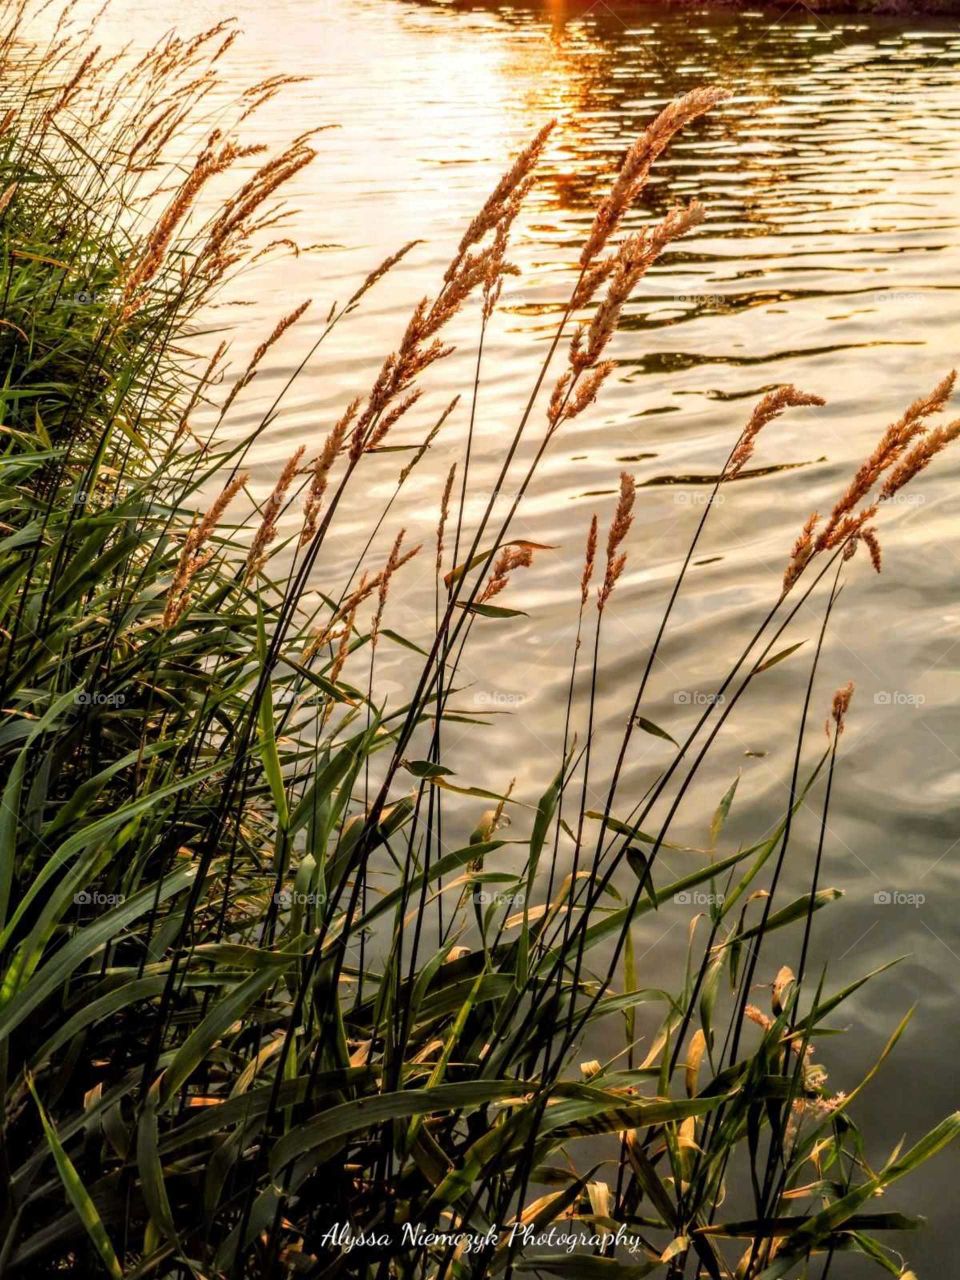 Stunning scene by the waters edge. Prairie grass dances in the wind and parallels the ripples of the water.